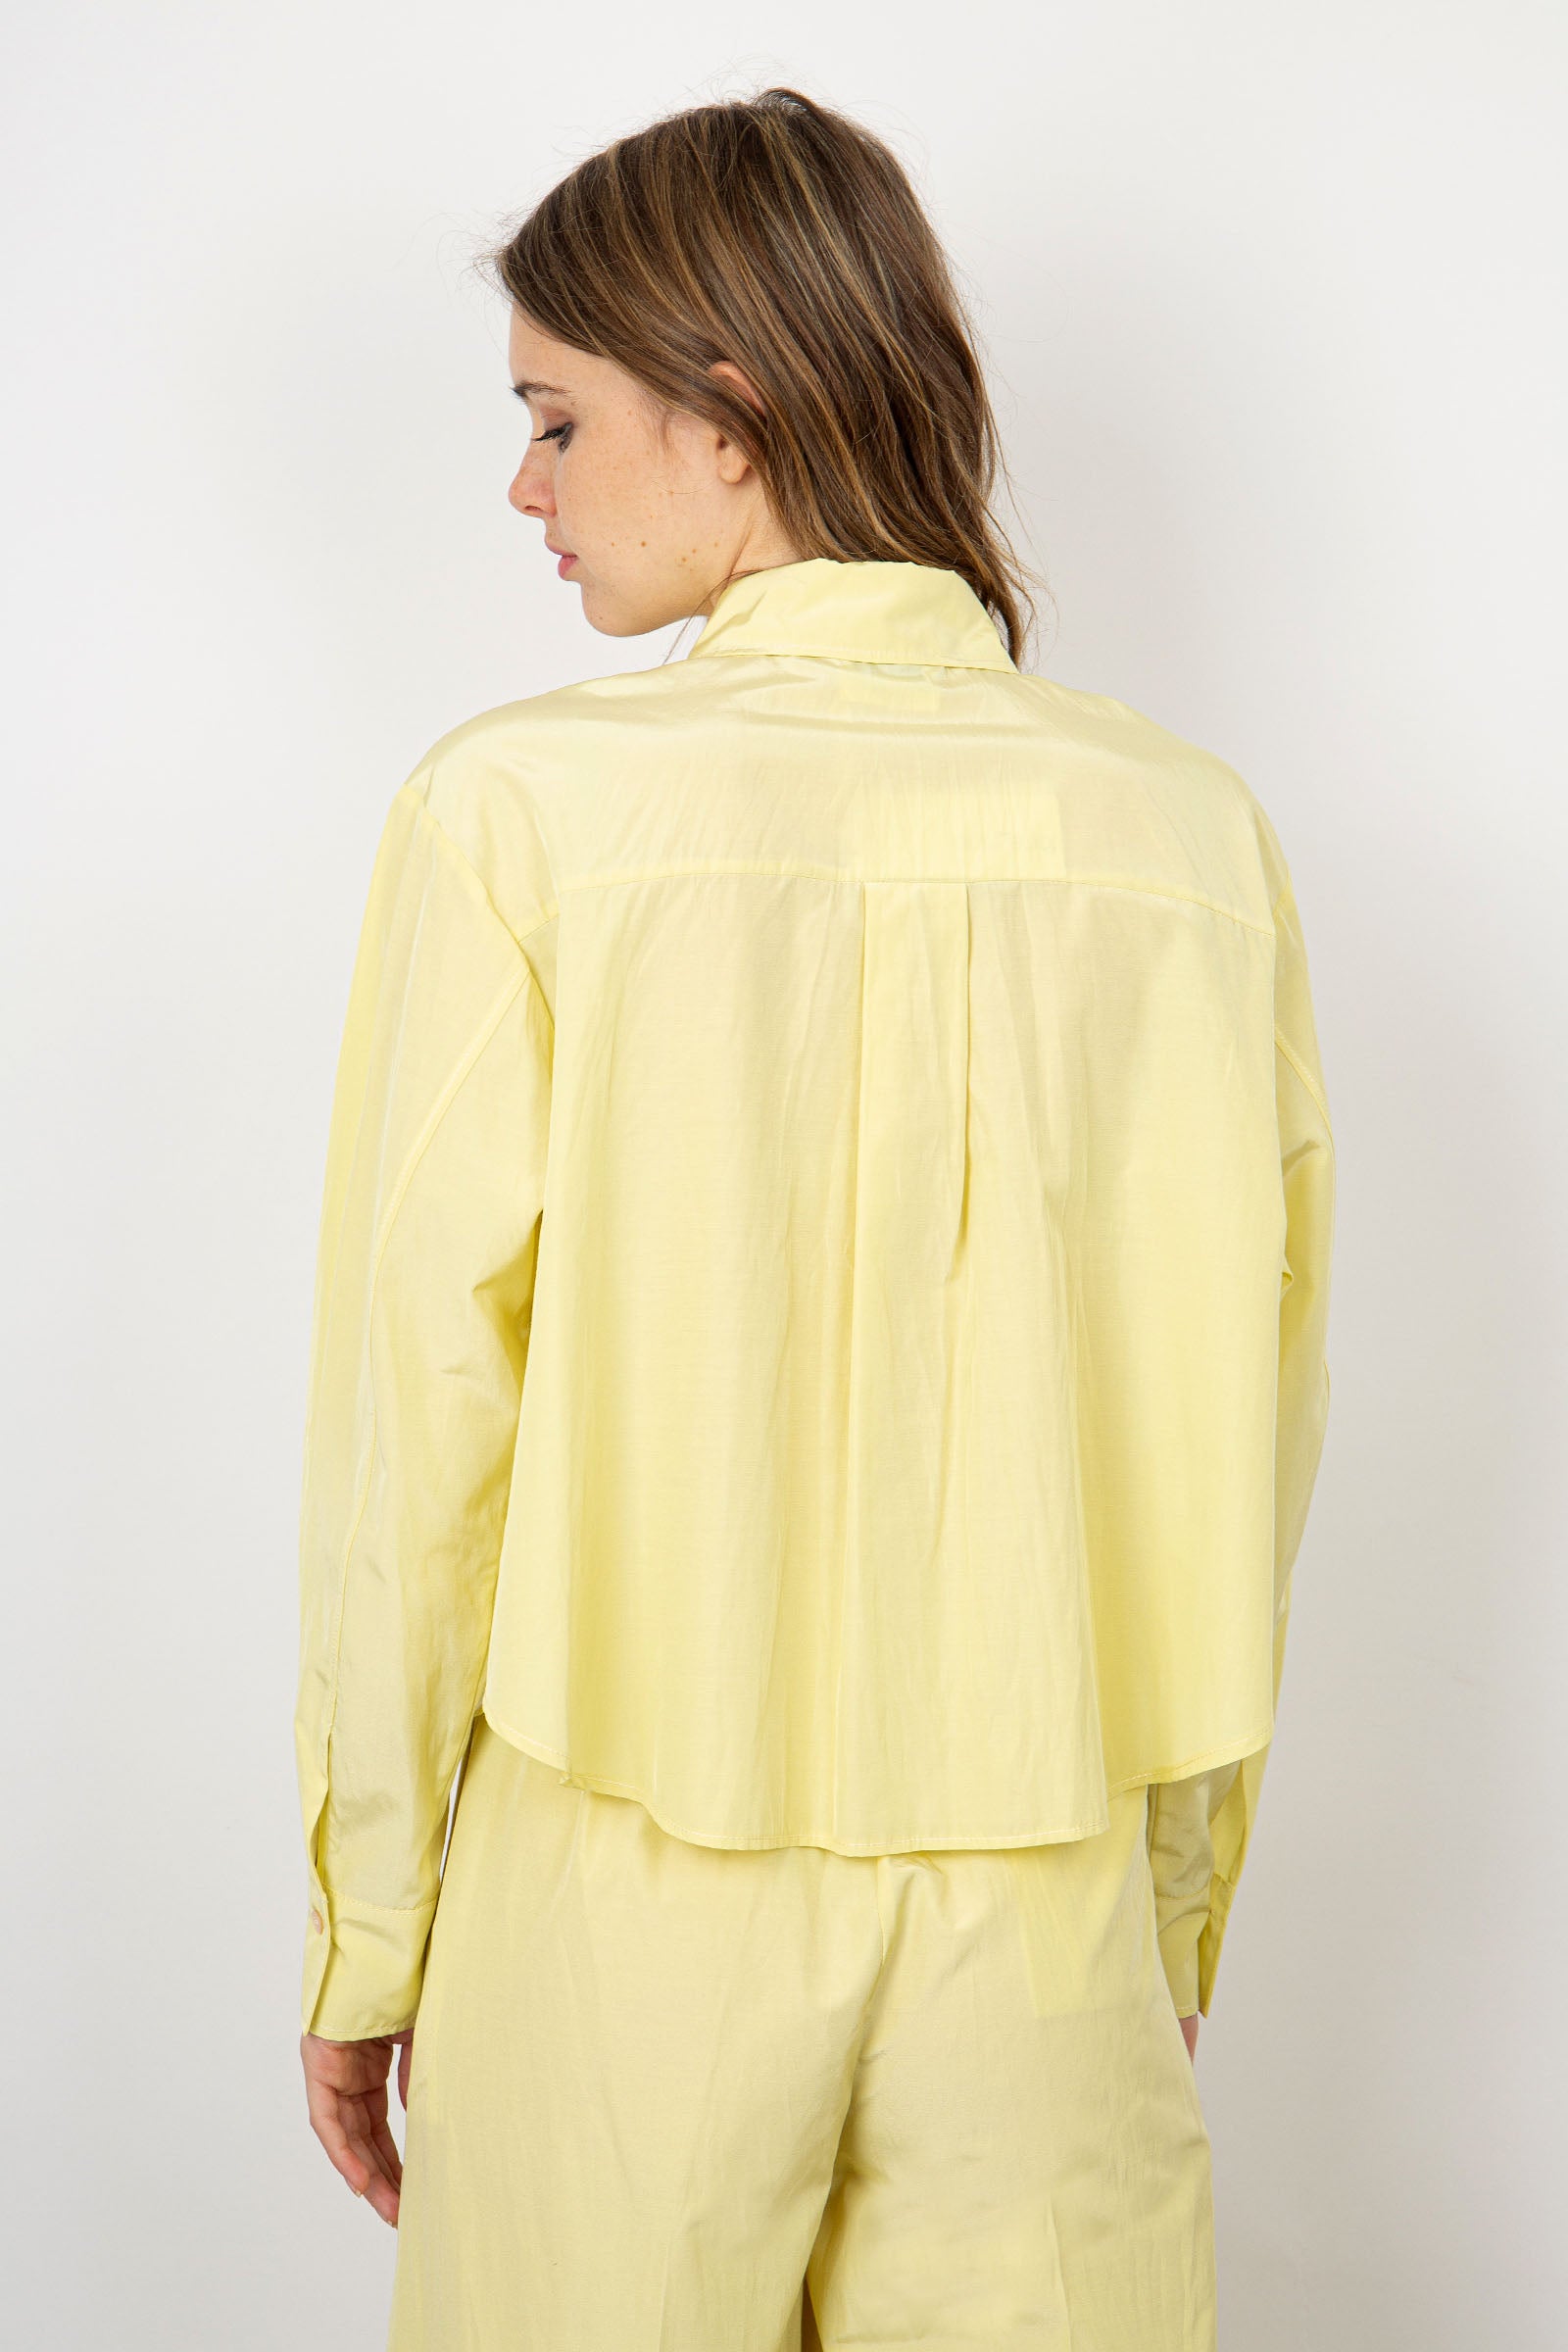 Forte Forte Boxy Chic Cotton Shirt in Yellow - 4